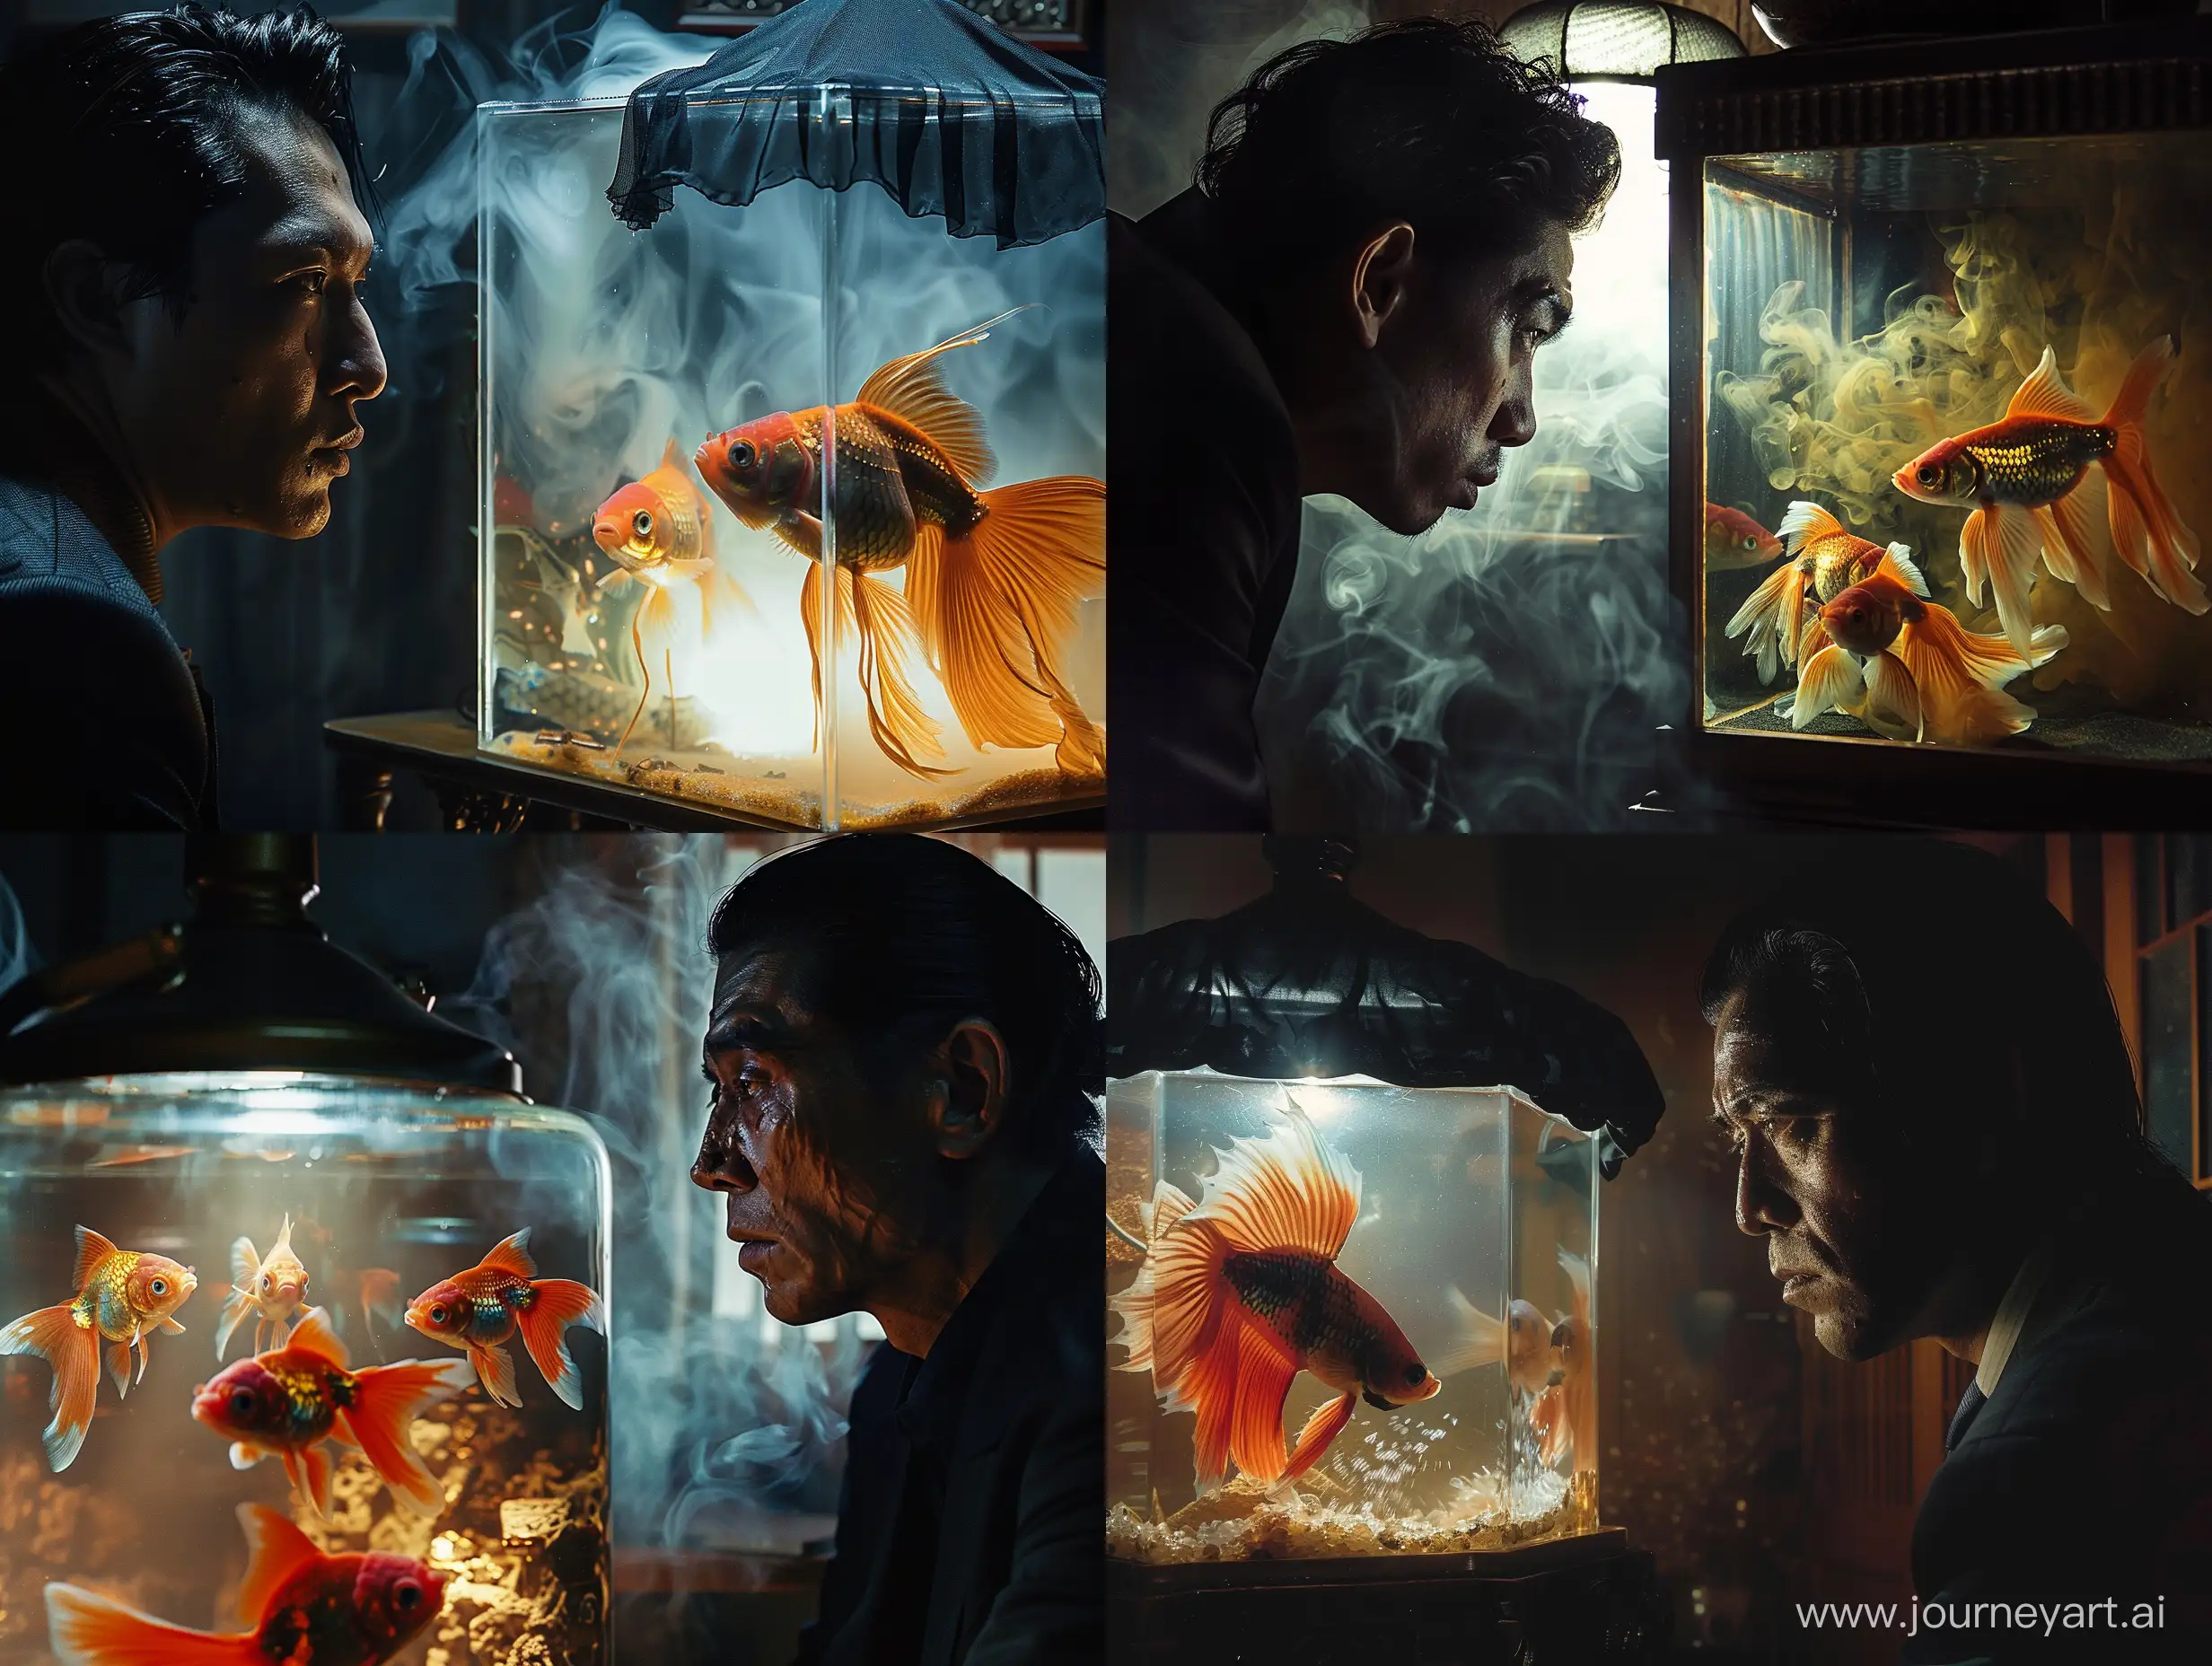 realistic movie stills, In an old-style Japanese apartment late at night, a gangster man wearing a black suit was watching Betta splendens fighting in front of a goldfish tank. The goldfish tank was emitting the light of a black silk lamp. The man looked melancholy, with a fierce look in his eyes, creating a melancholy atmosphere. , aesthetics of violence, an amazing fantasy movie scene, strong dramatic tension, rich details, clear light and shadow, a strong sense of cinema 